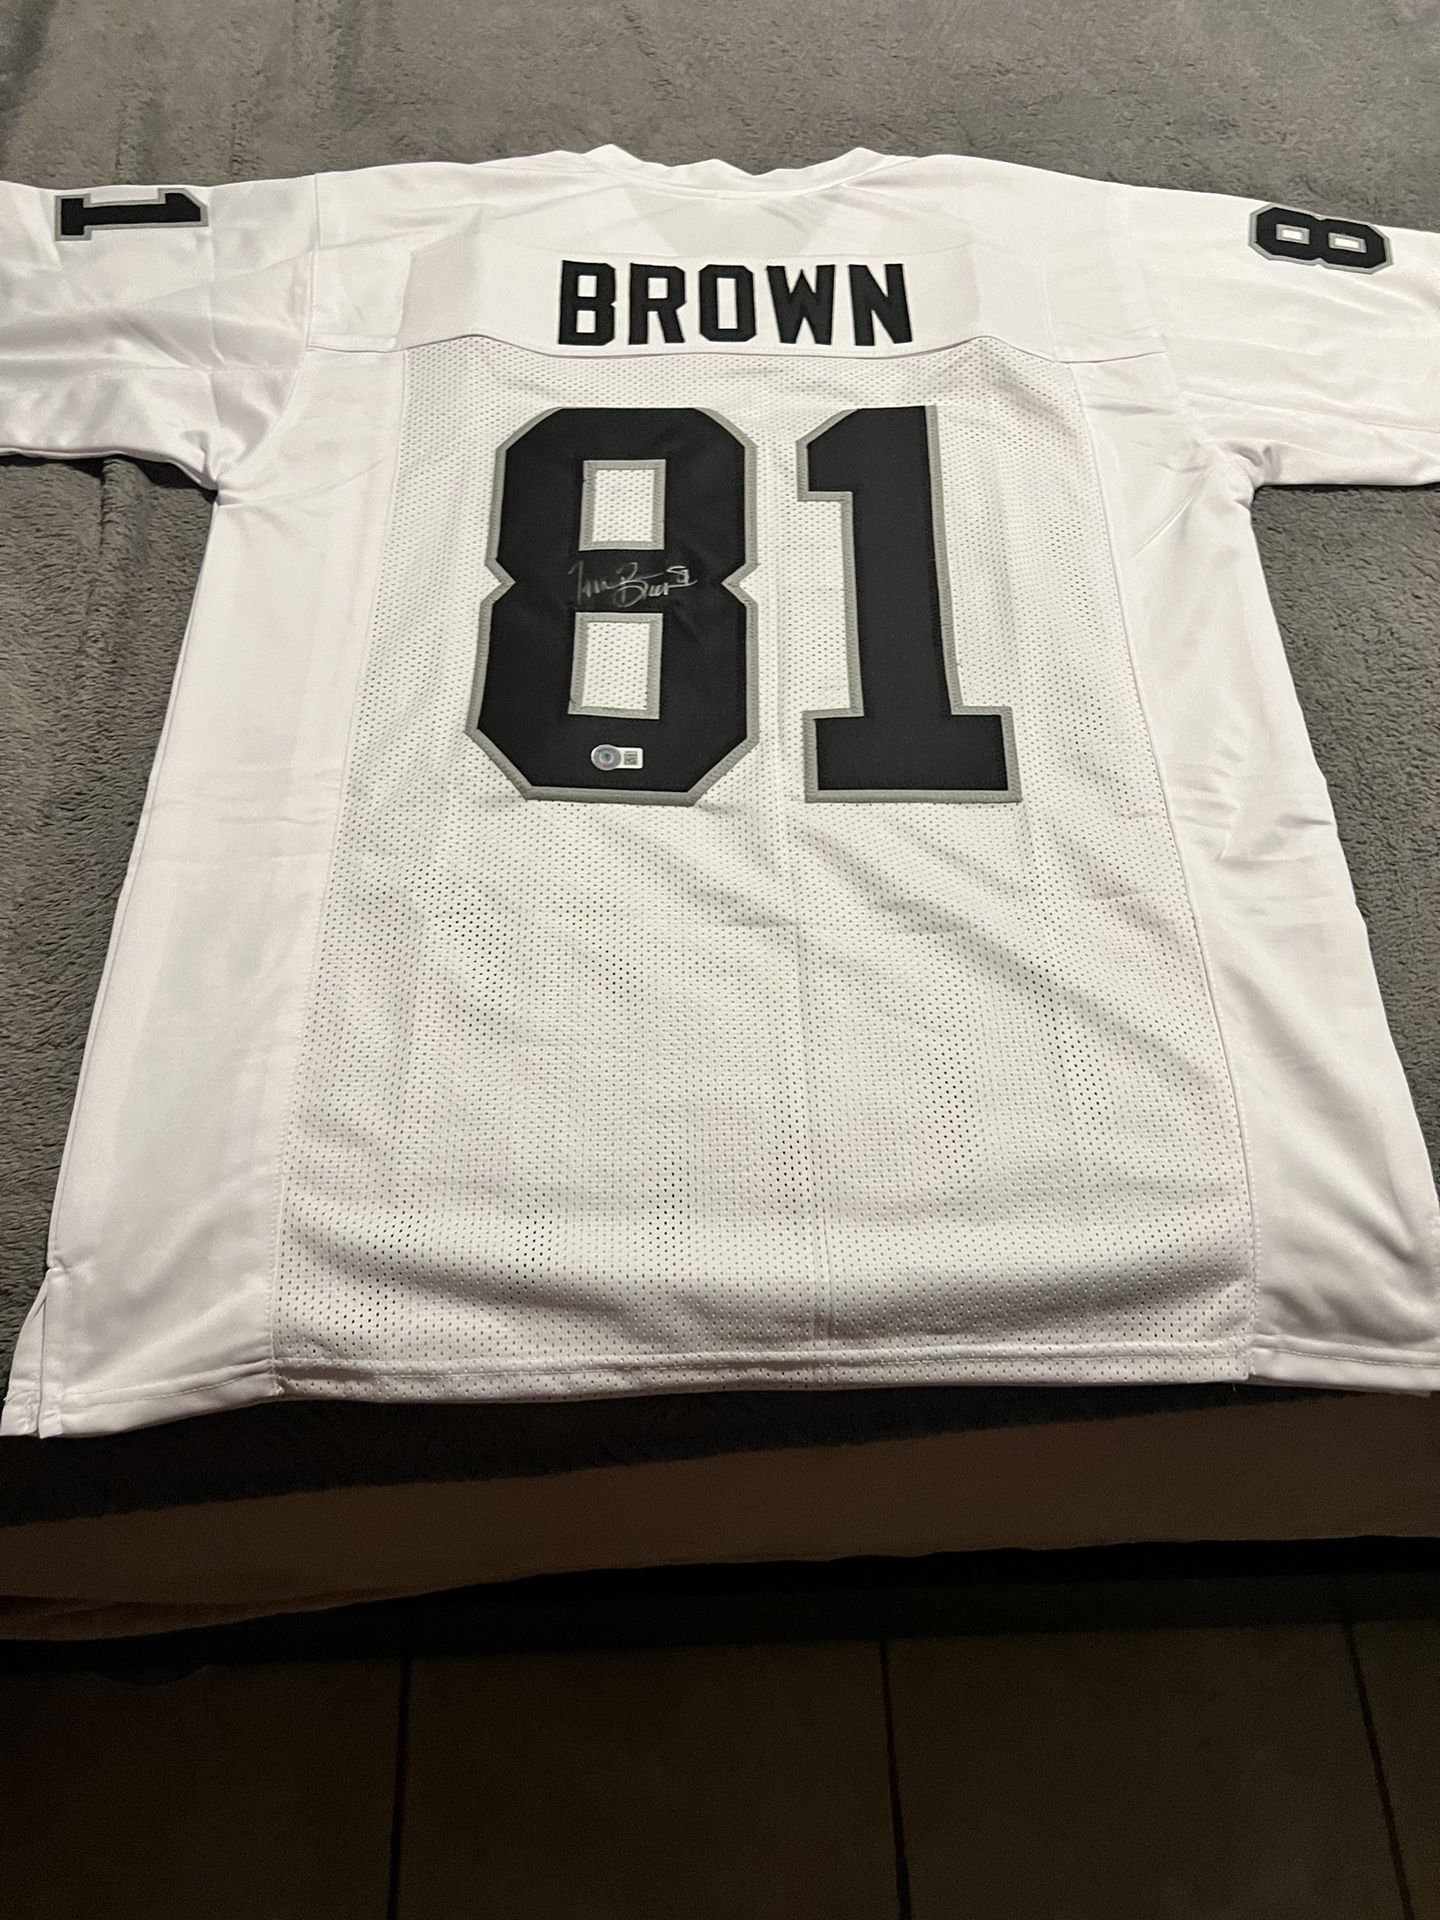 Tim Brown Signed Raiders Jersey